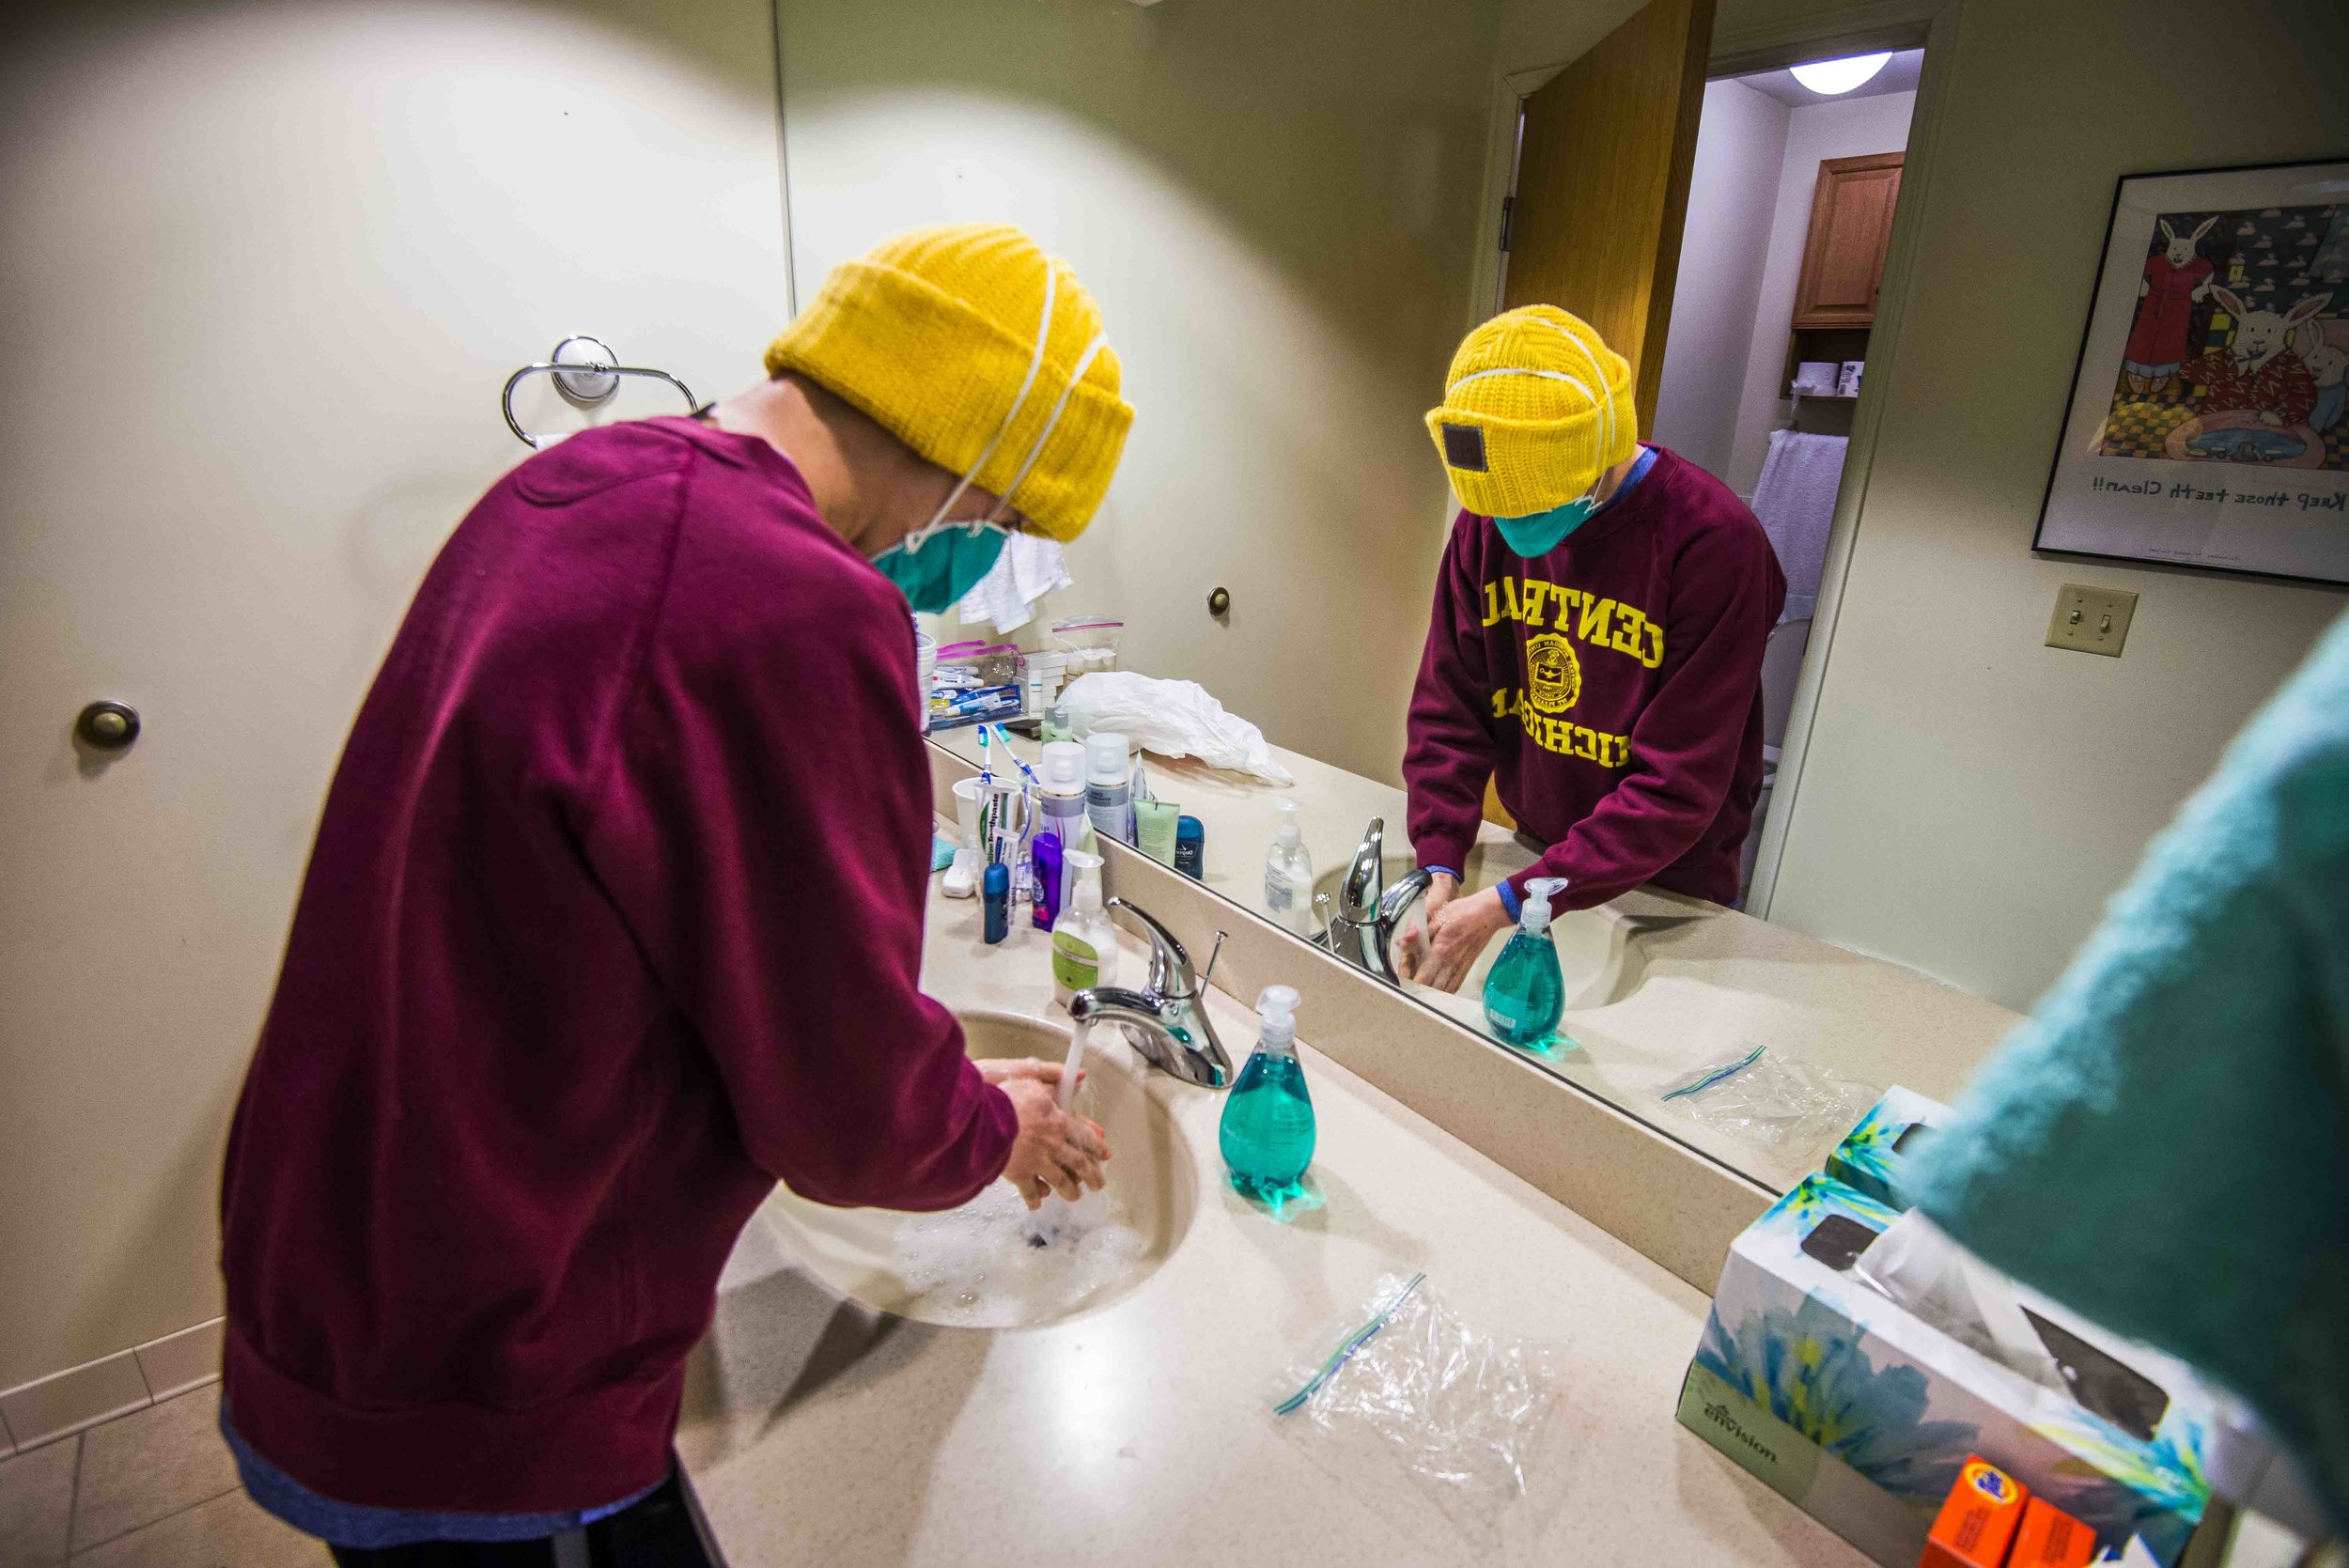  Tanner washes his hands in his room at the Ronald McDonald House, March 5. Tanner is required to wear a mask whenever he is outside or in contact with people other than his mother.&nbsp; 